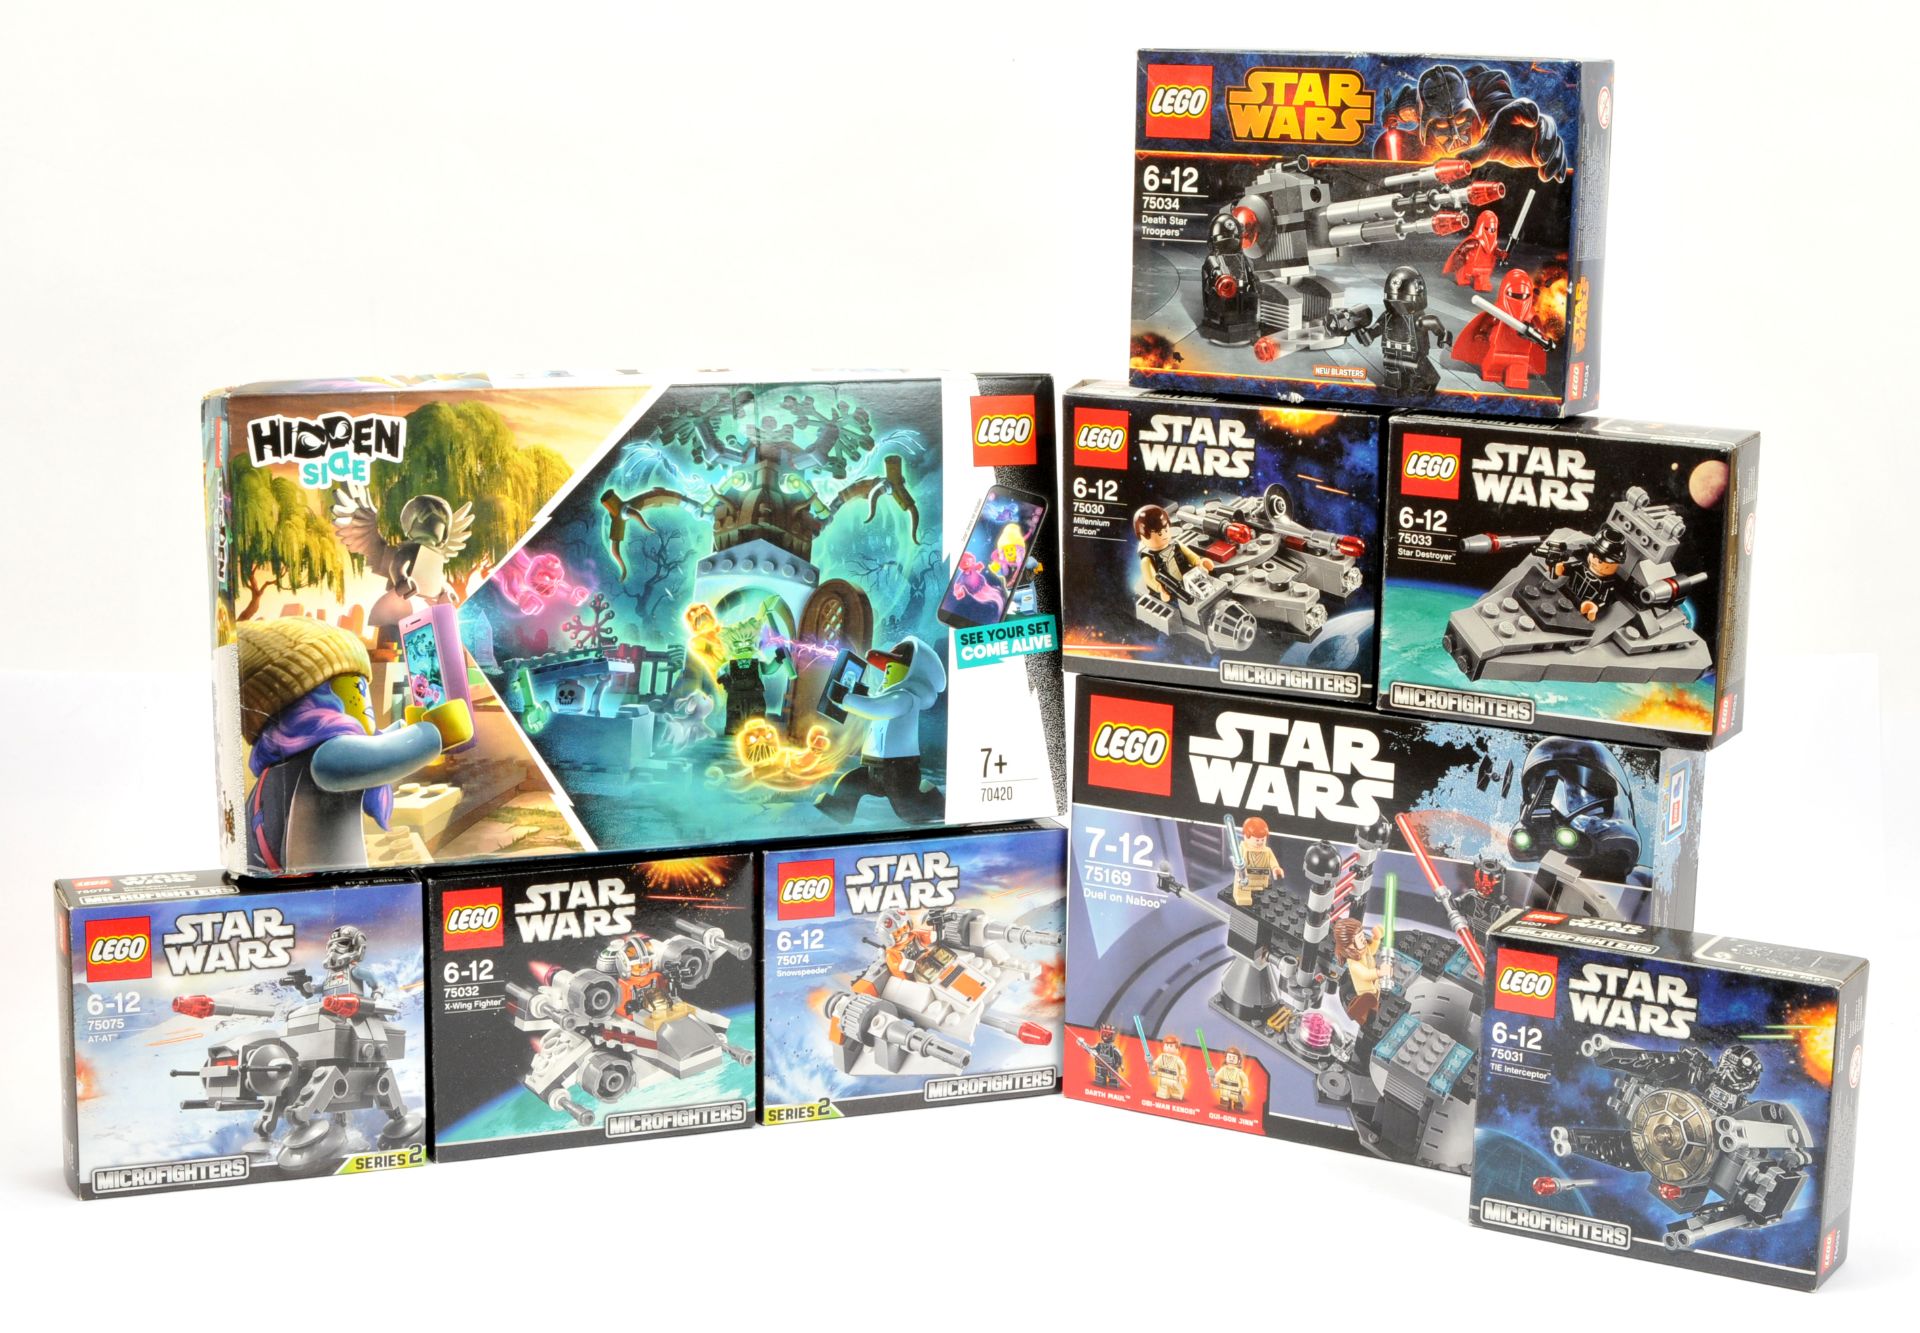 Lego group of boxed sets (1) 70420 Hidden Side (2) 75169 Star Wars - Duel On Naboo (3) 75034 Deat...